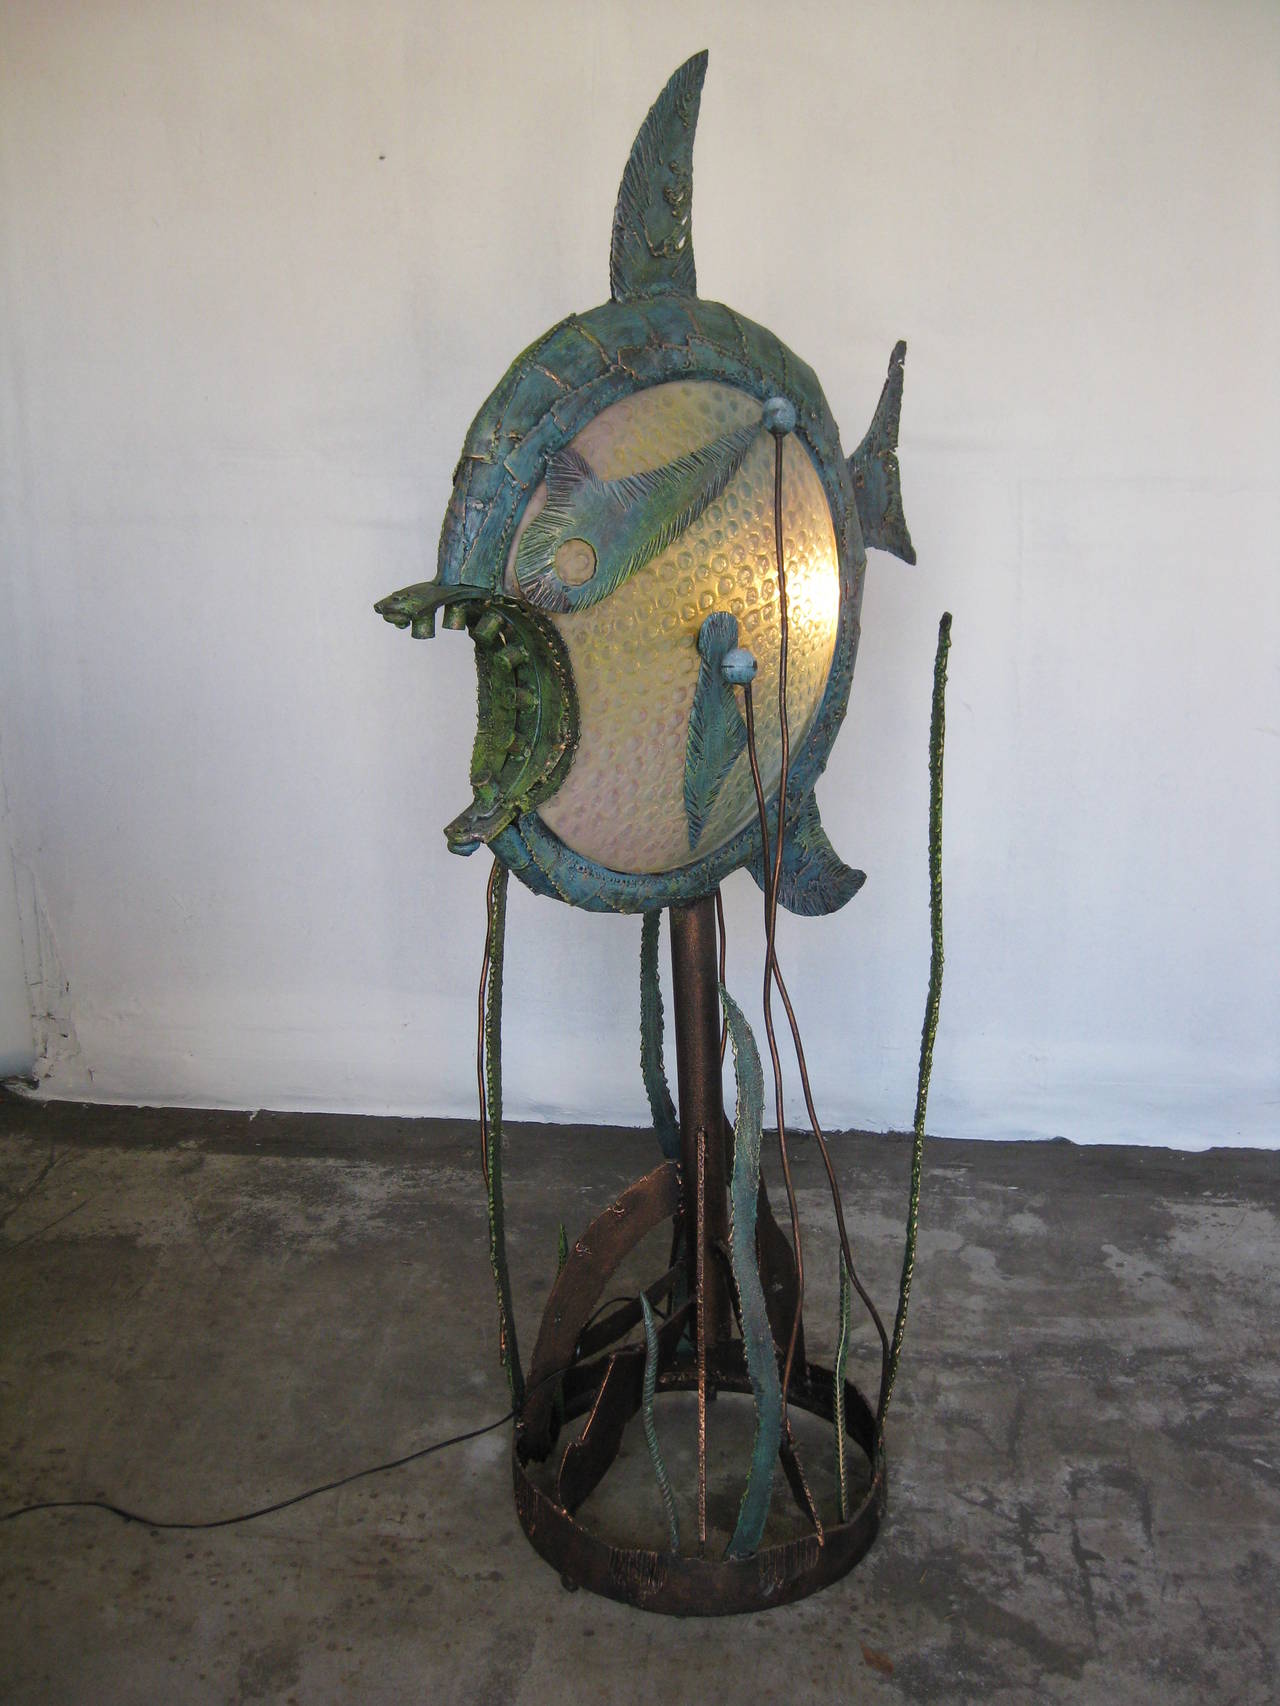 A very large and heavy floor lamp of 1 meter 63 cm.tall.
An absolute eye catcher,a one off.
Artist unknown.
Nice lighting effect when switched on because of the texture .
Production year unknown to me,i assume the 80-ies.